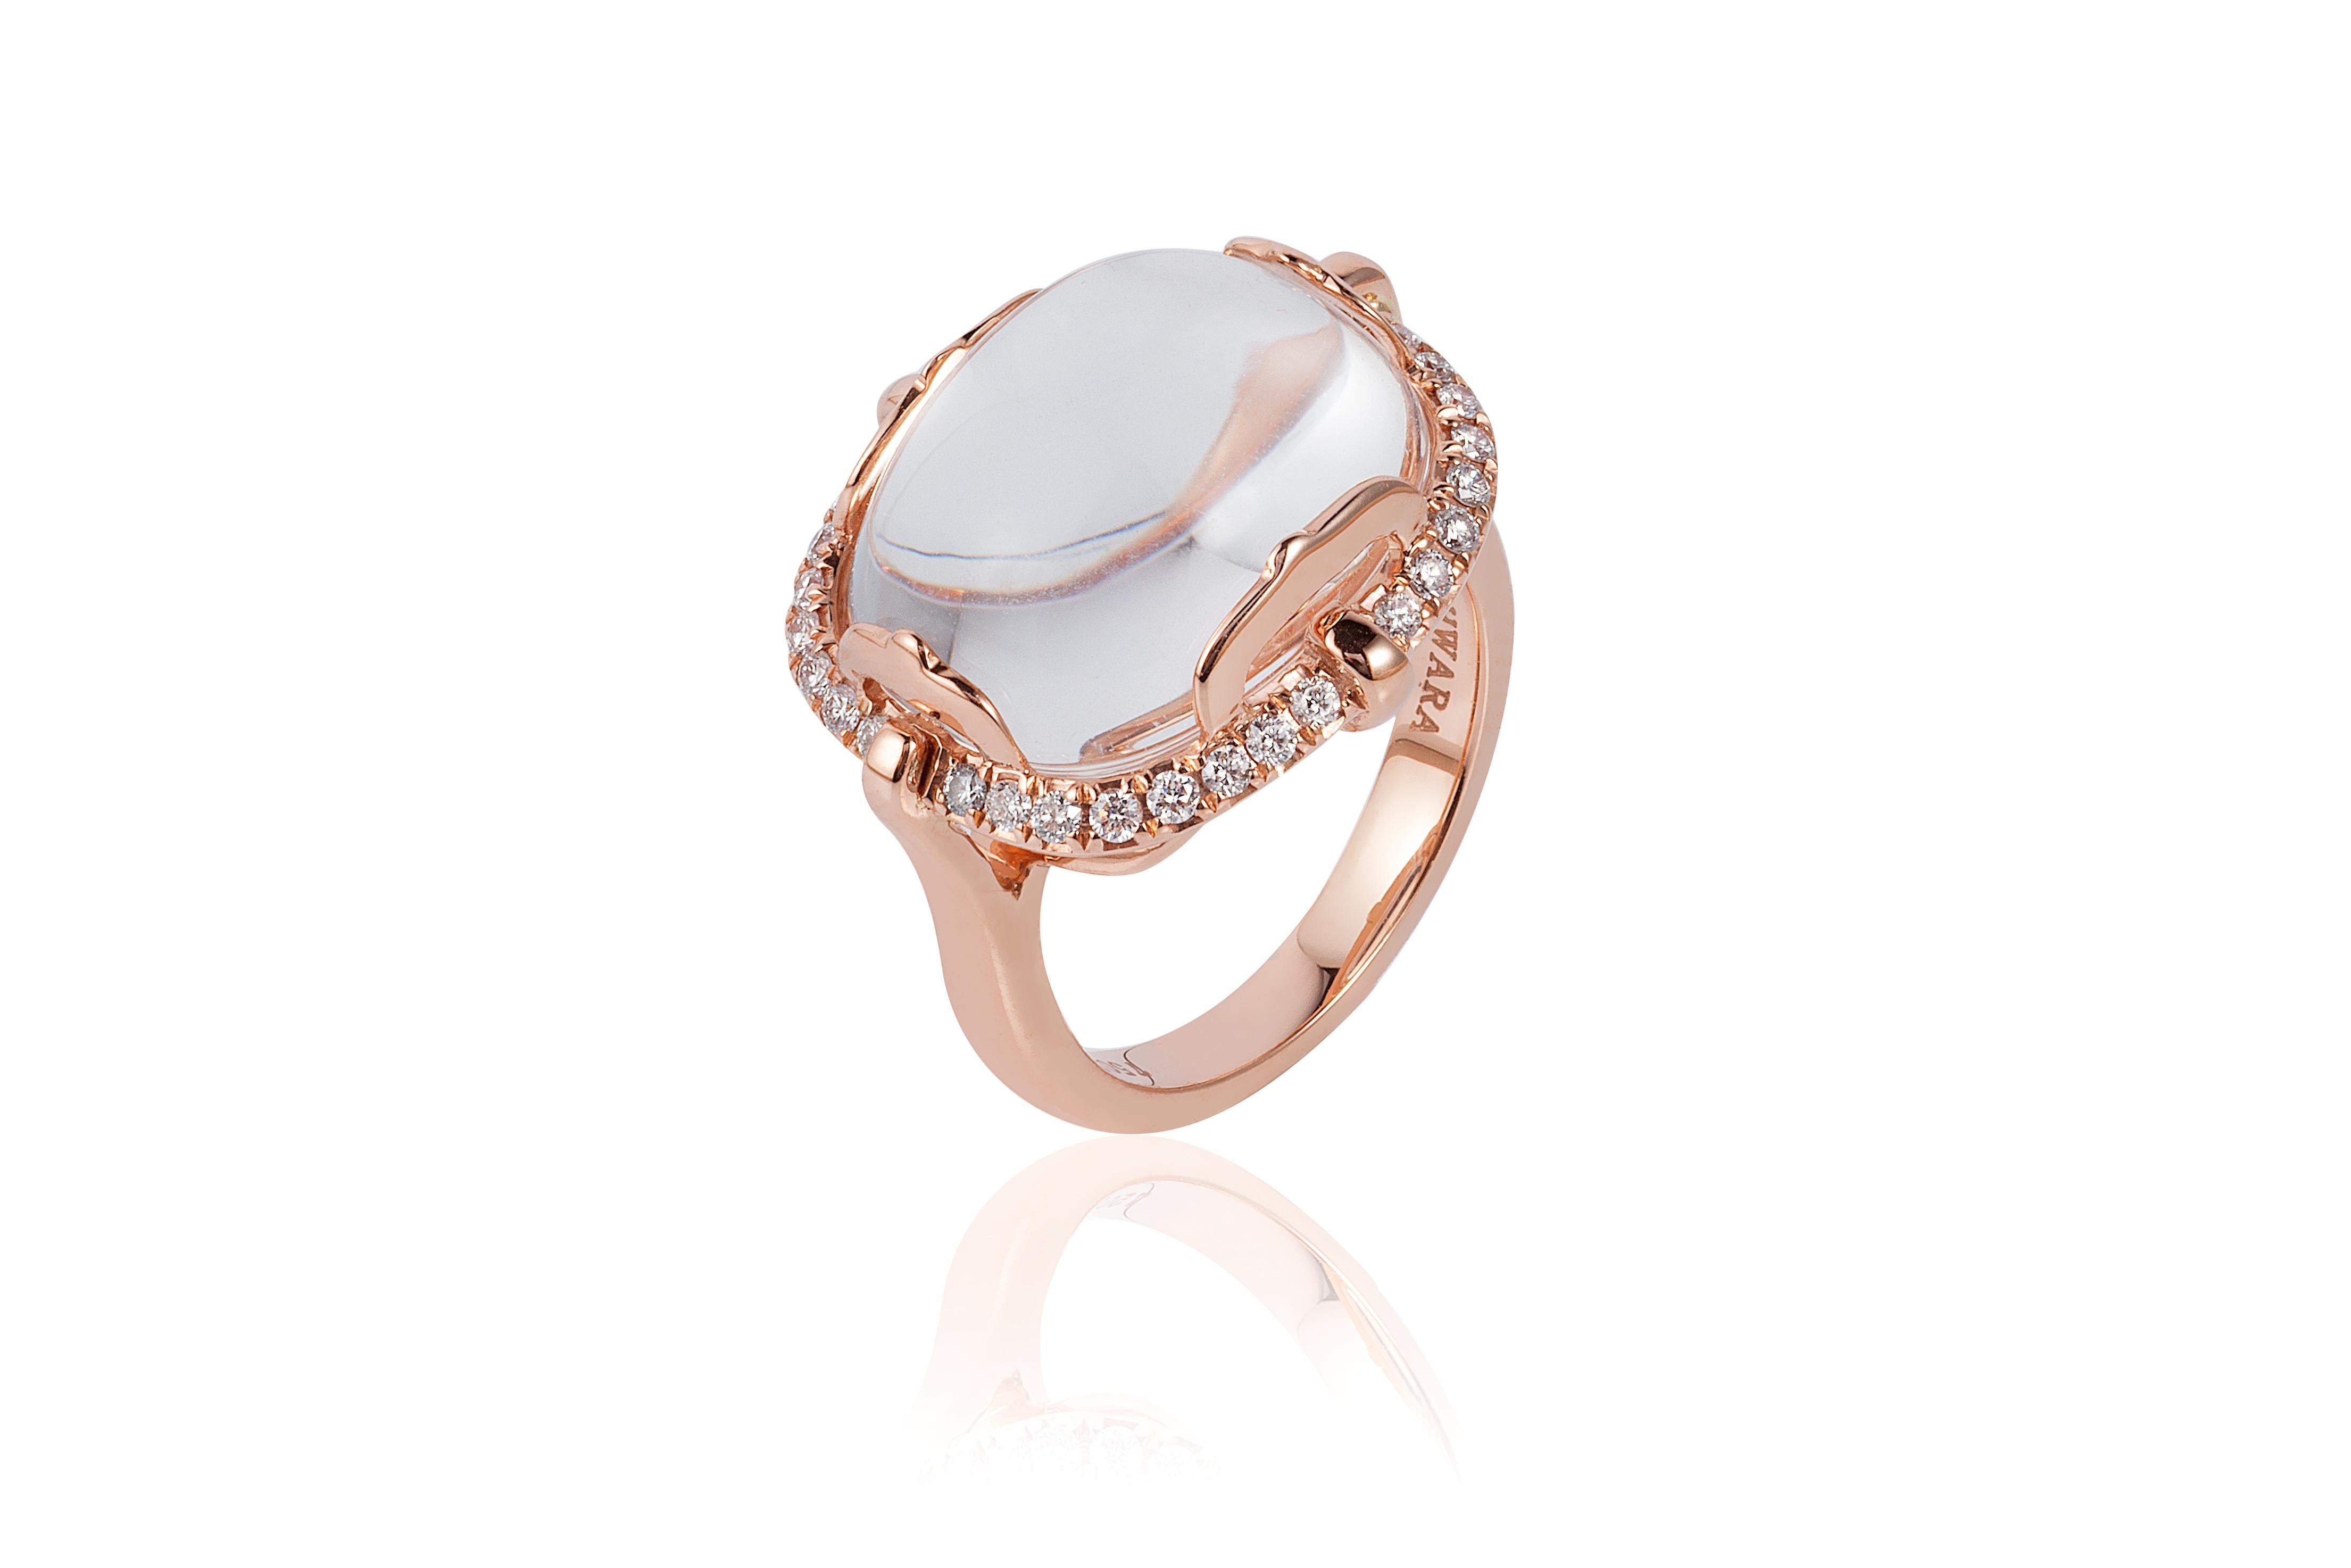 Rock Crystal Cushion Cabochon Ring in 18K Pink Gold with Diamonds from 'Rock 'N Roll' Collection

Stone Size: 16 x 13 mm 

Gemstone Approx Wt: 12.72 Carats

Diamonds: G-H / VS, Approx Wt :0.34 Carats